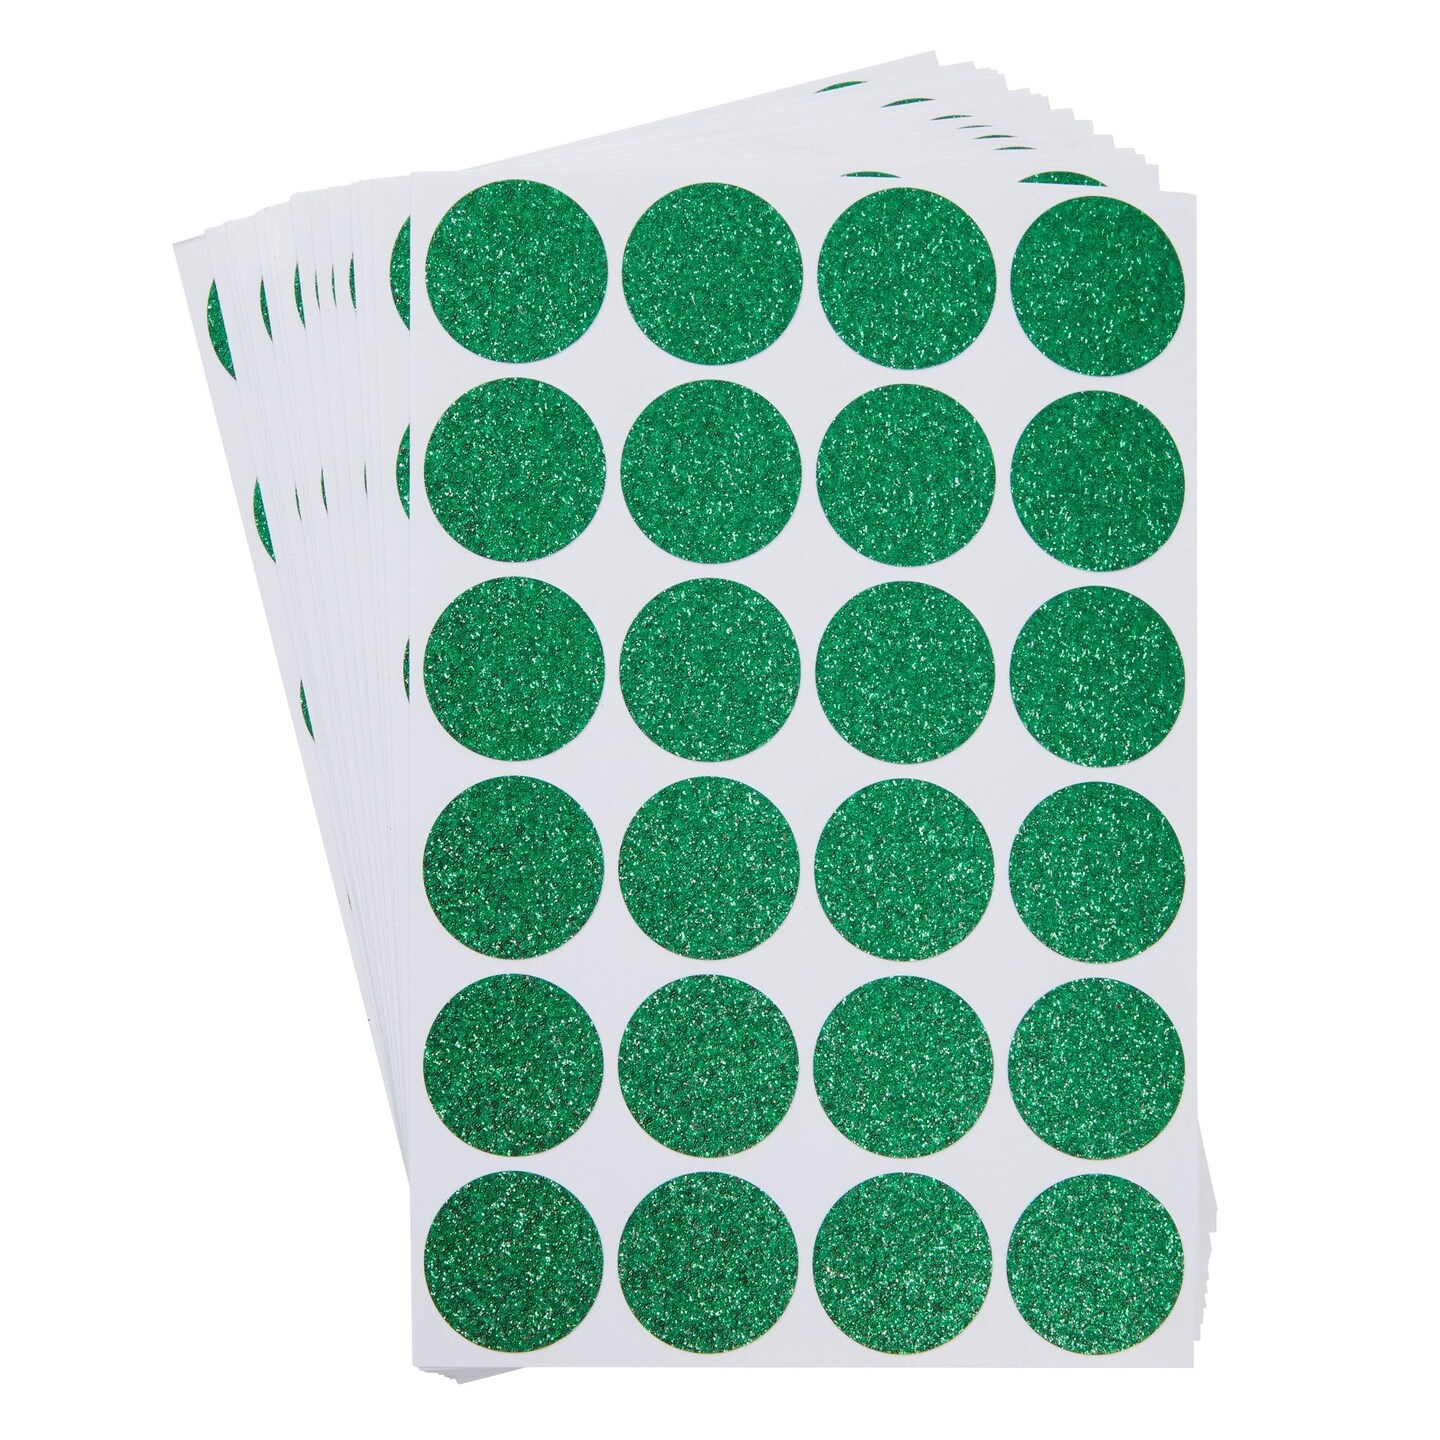 360-Pack 1-Inch Round Glitter Dots, Sparkle Stickers for Wedding